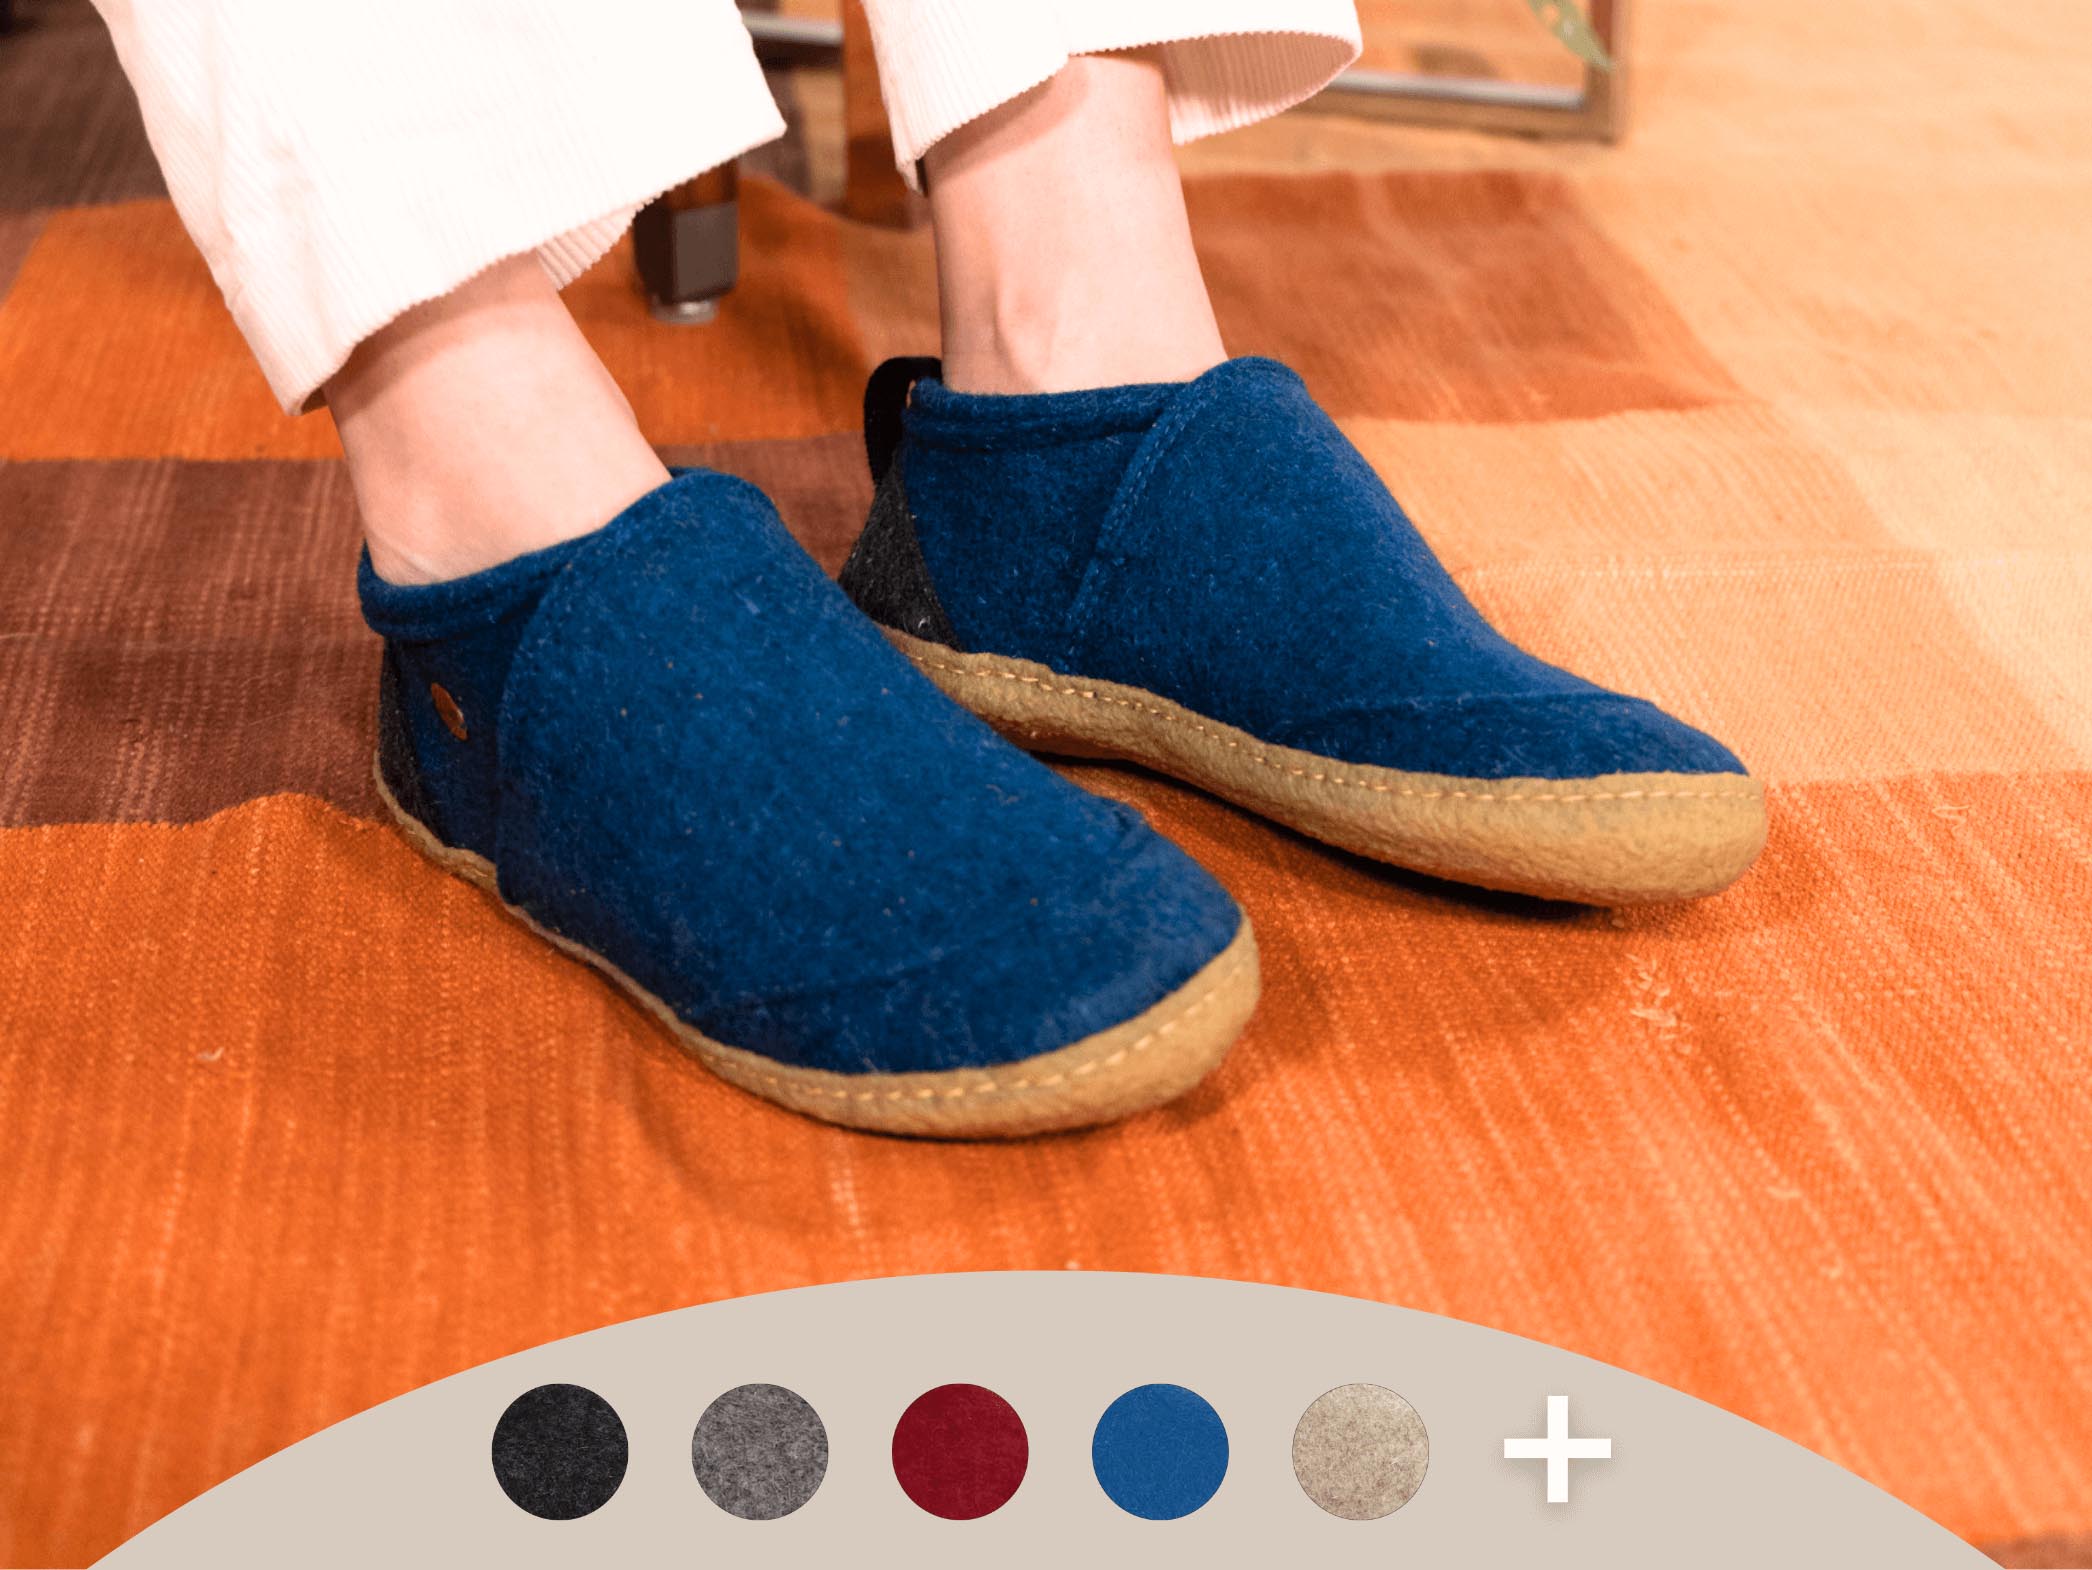 Yeti Handcrafted New Men Women Ladies Sheepskin Moccassin Boot Slippers  Made from 100% Just Fur Lined unique gift present idea eco shearling